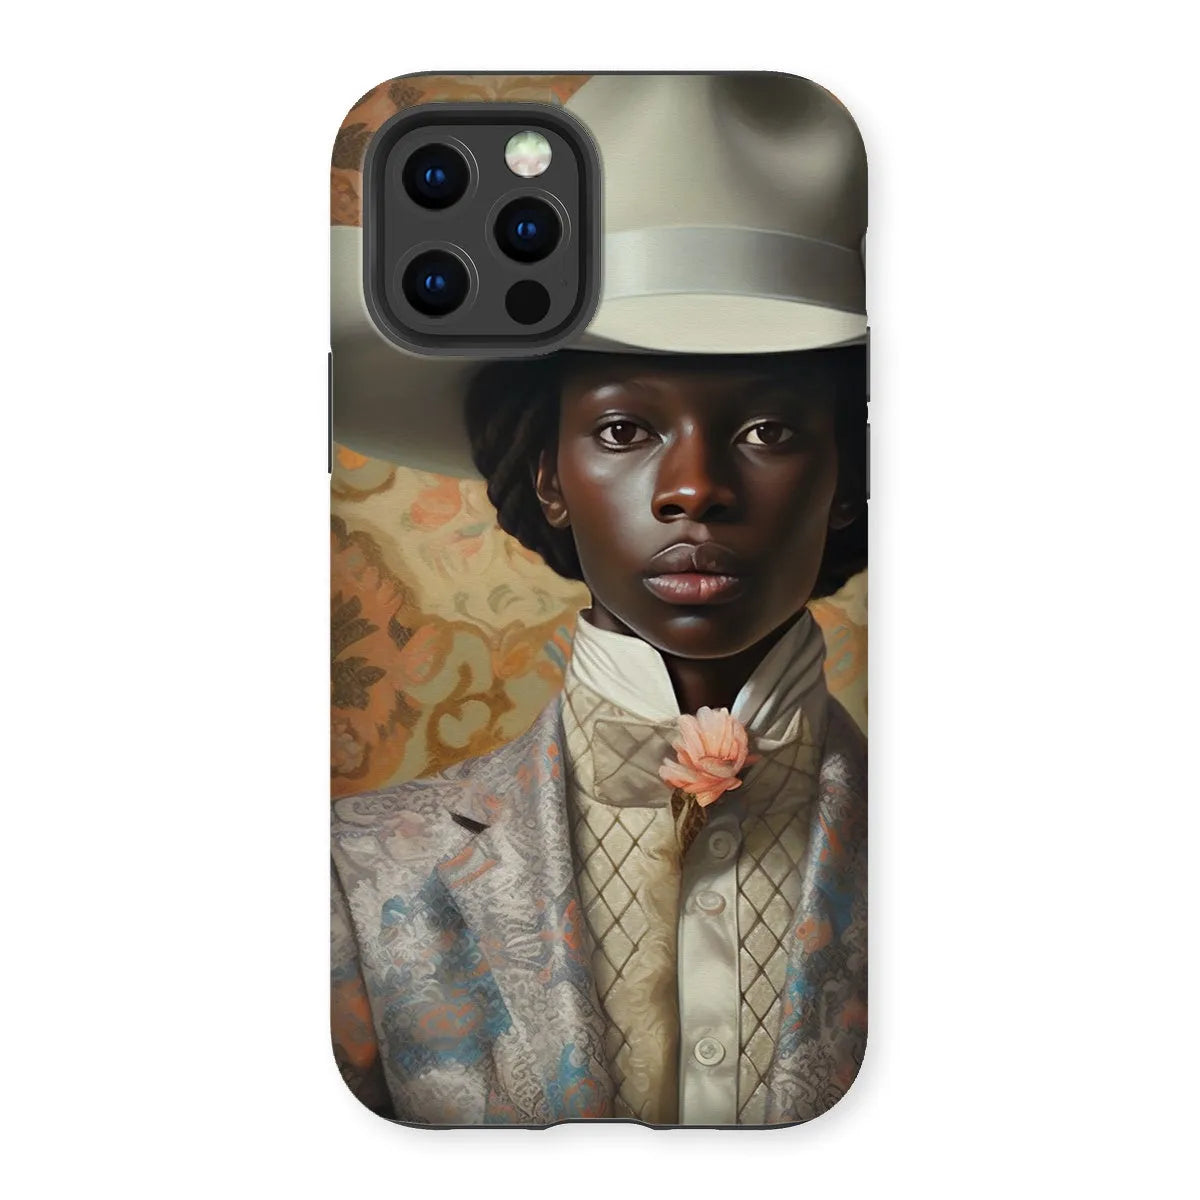 Caesar The Gay Cowboy - Gay Aesthetic Art Phone Case - Iphone 12 Pro / Matte - Mobile Phone Cases - Aesthetic Art